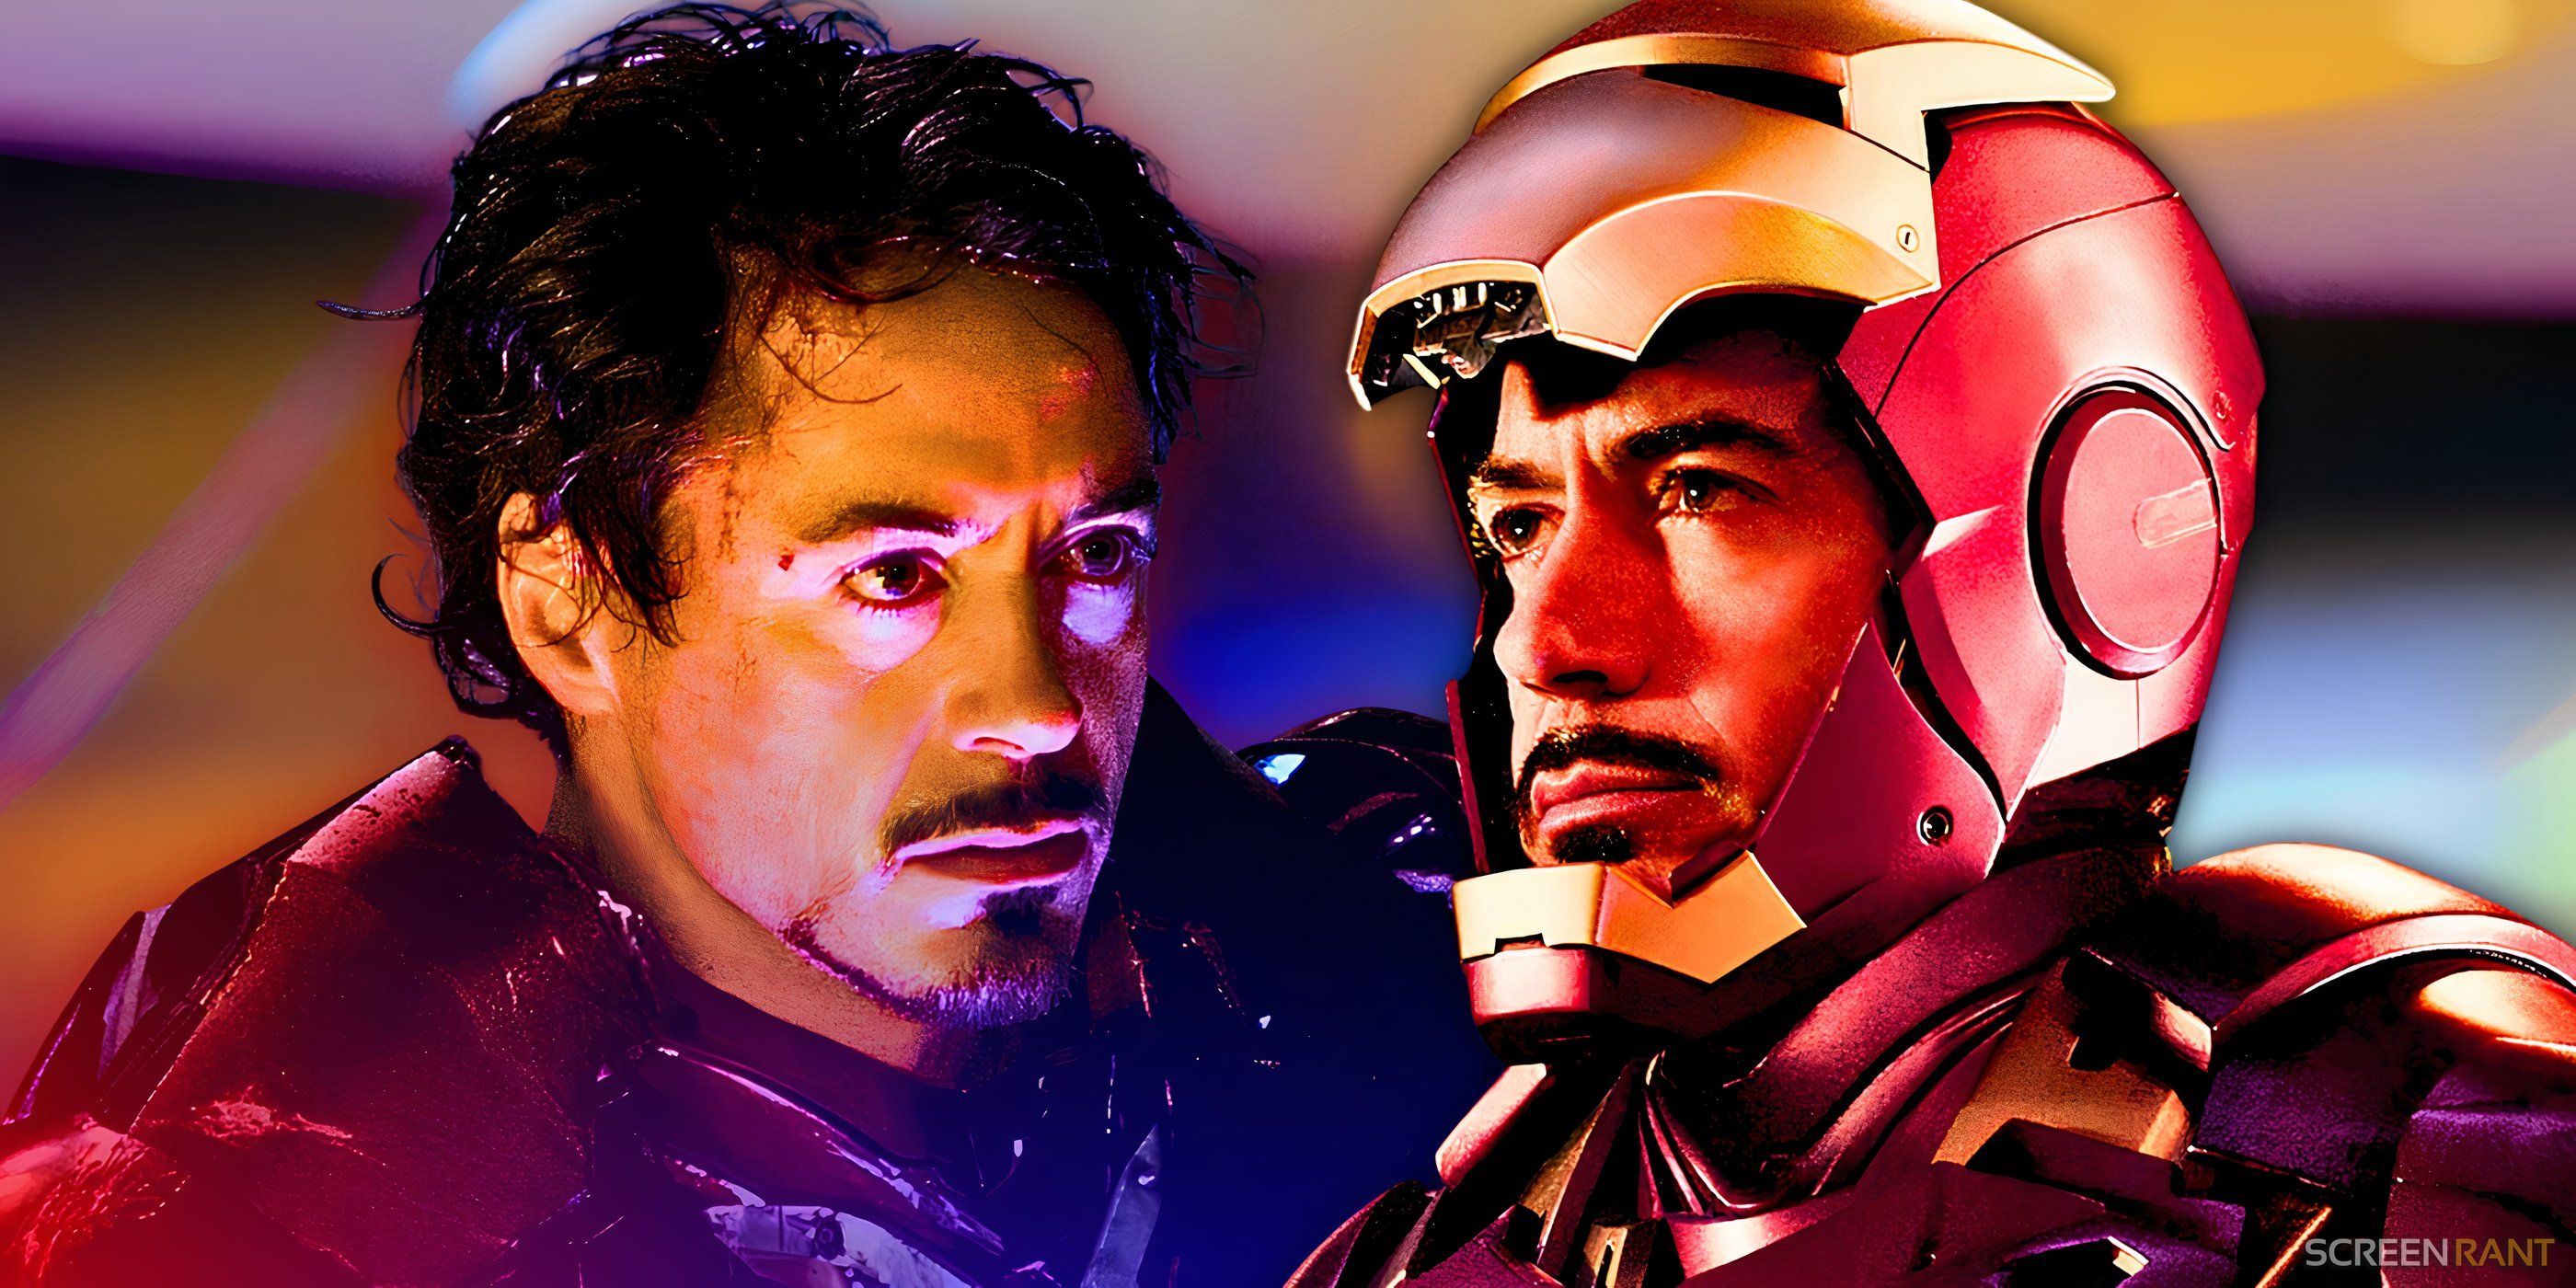 Robert Downey Jr. as Tony Stark with and without a helmet in 2008's Iron Man